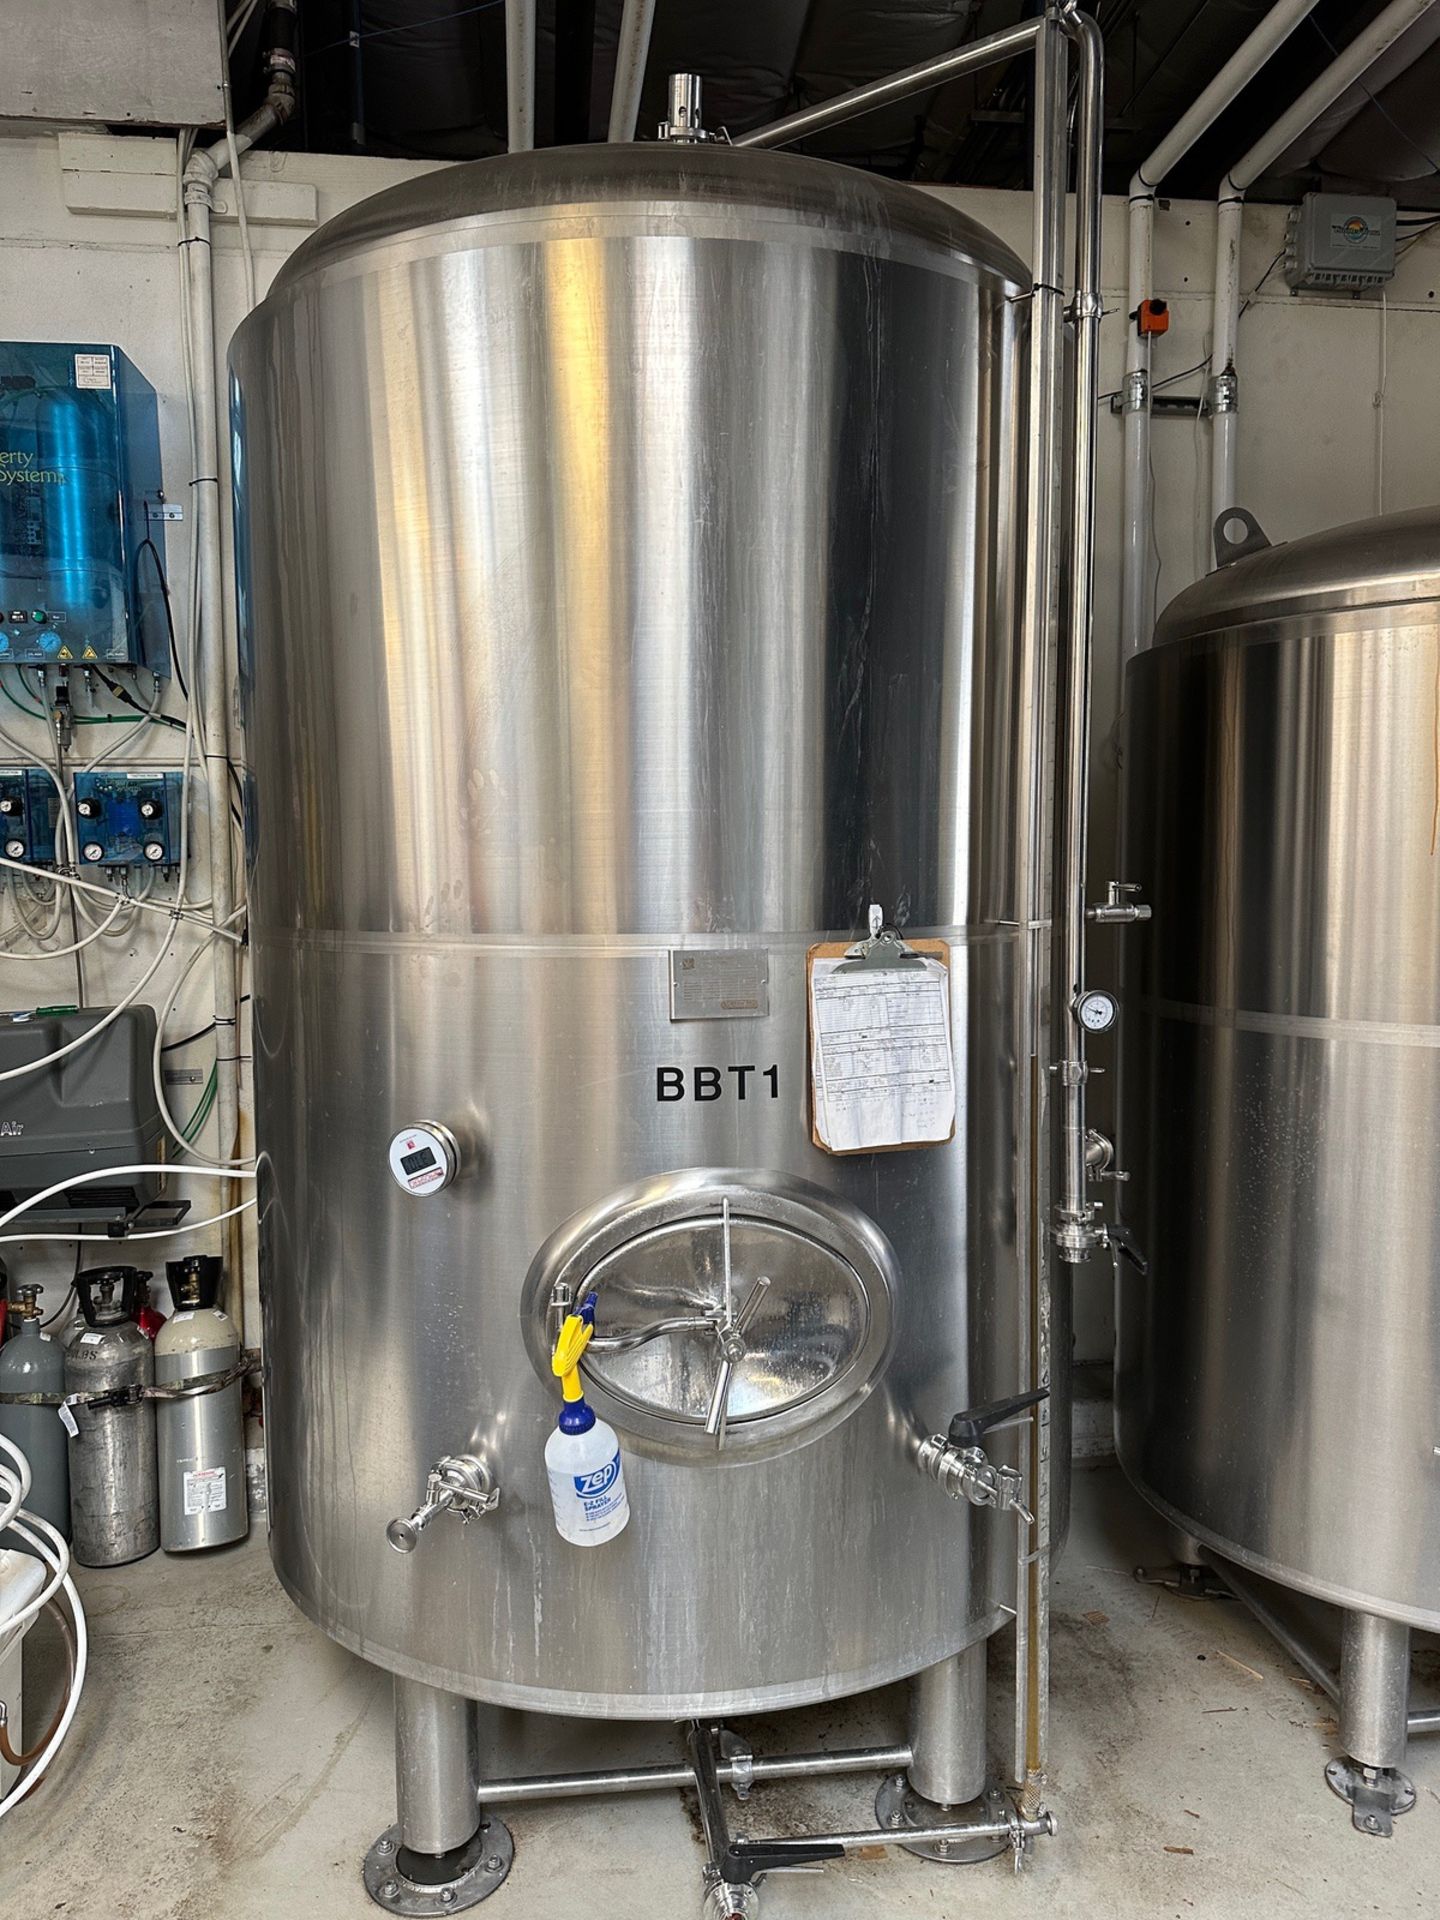 Prospero Brew Pro 30 BBL Stainless Steel Brite Tank - Dish Bottom, Glycol Jacketed, | Rig Fee $1250